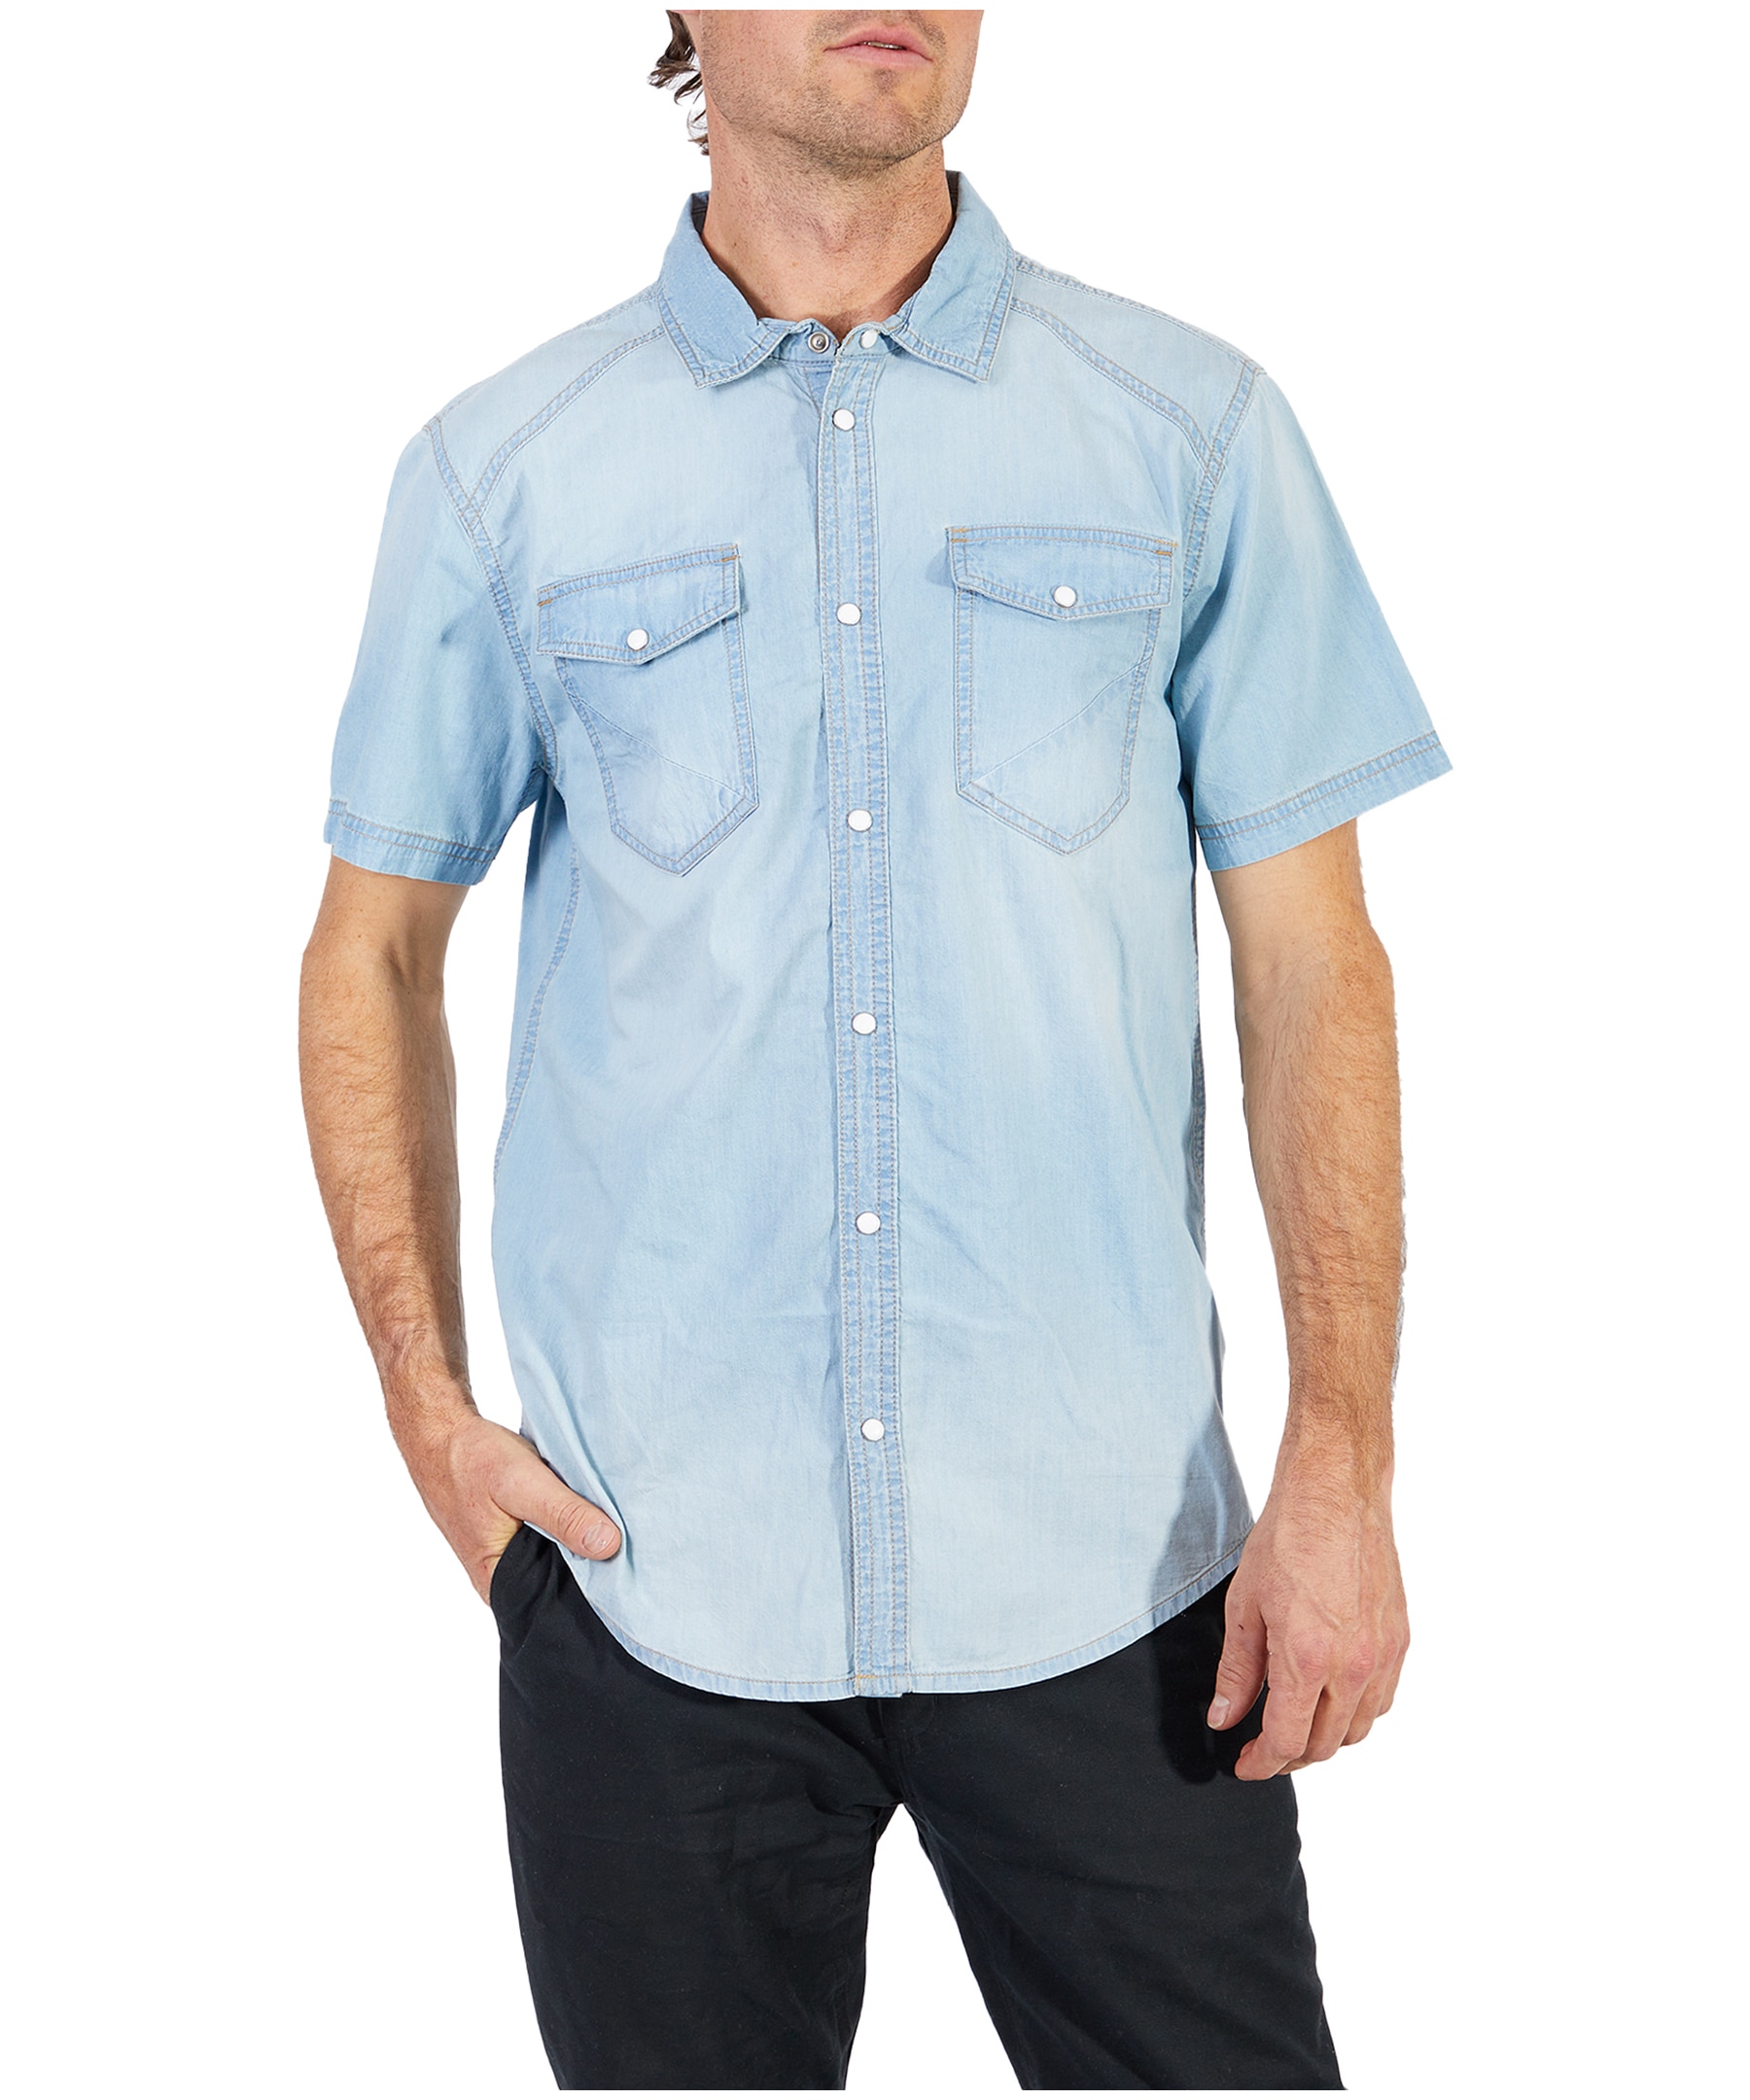 Men's Chambray Short Sleeve Modern Fit Casual Cotton Shirt | Marks